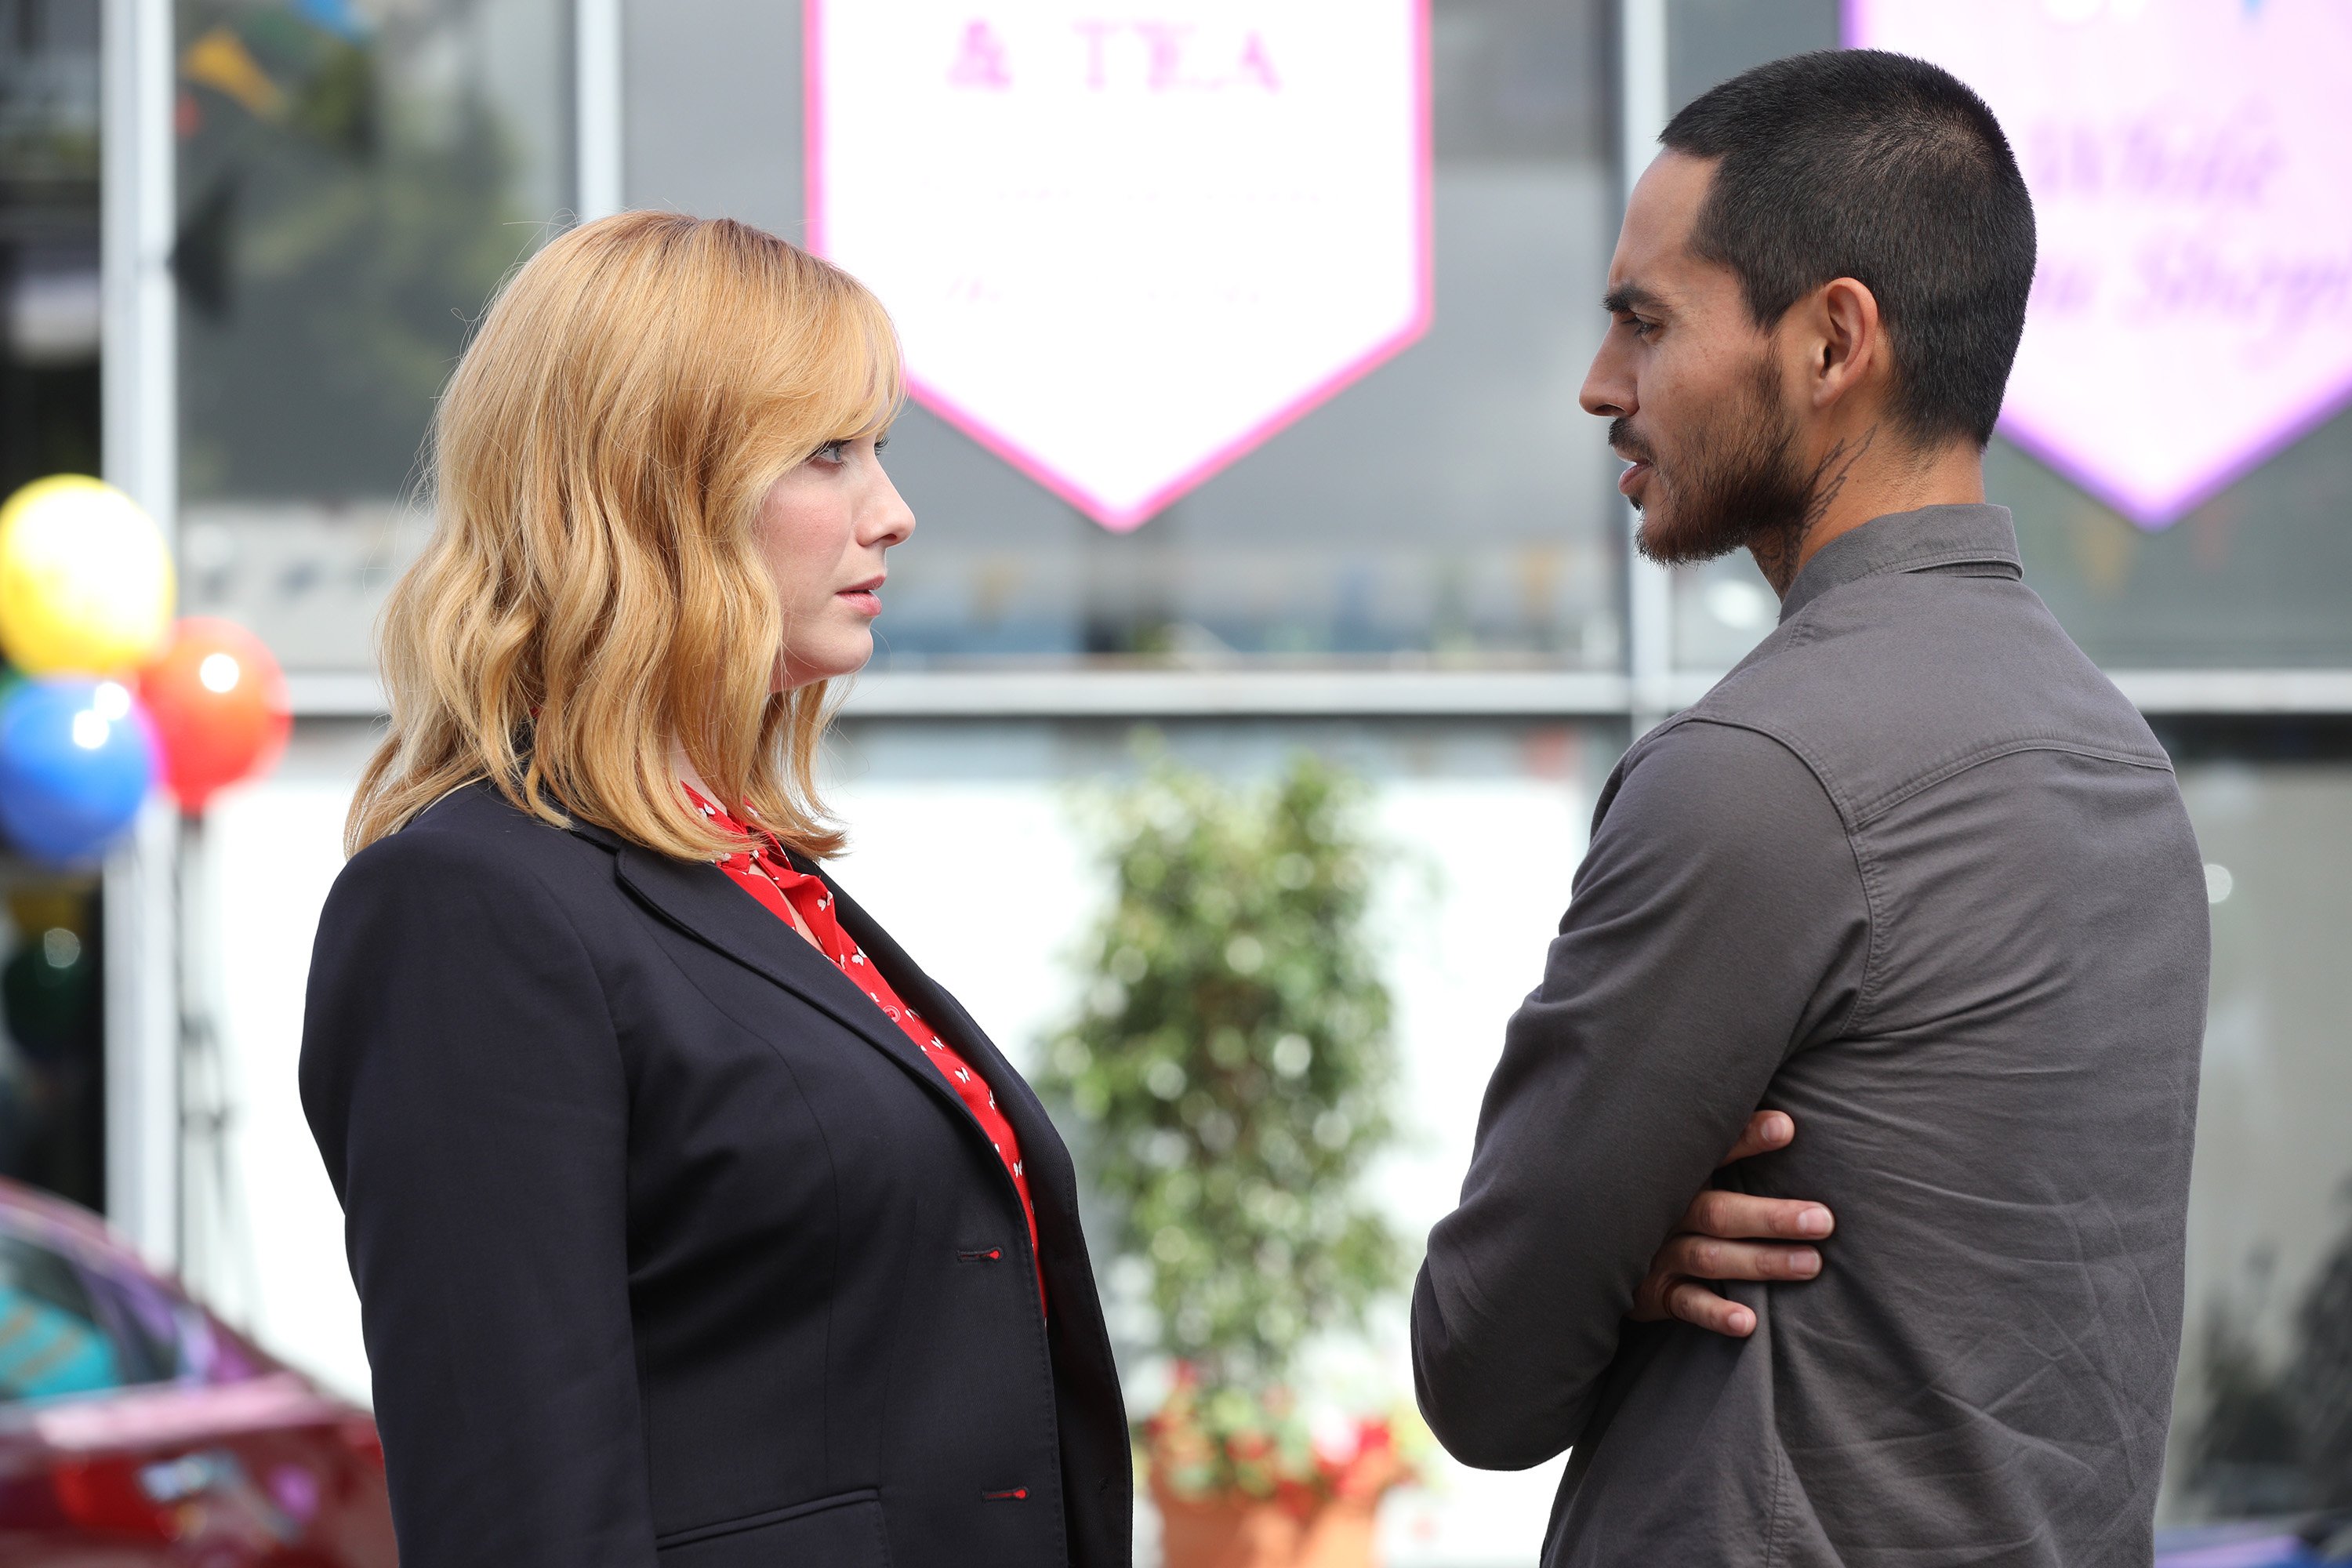 'Good Girls': Christina Hendricks at Beth wearing a black blazer and red shirt while speaking to Manny Montana as Rio in a grey shirt.